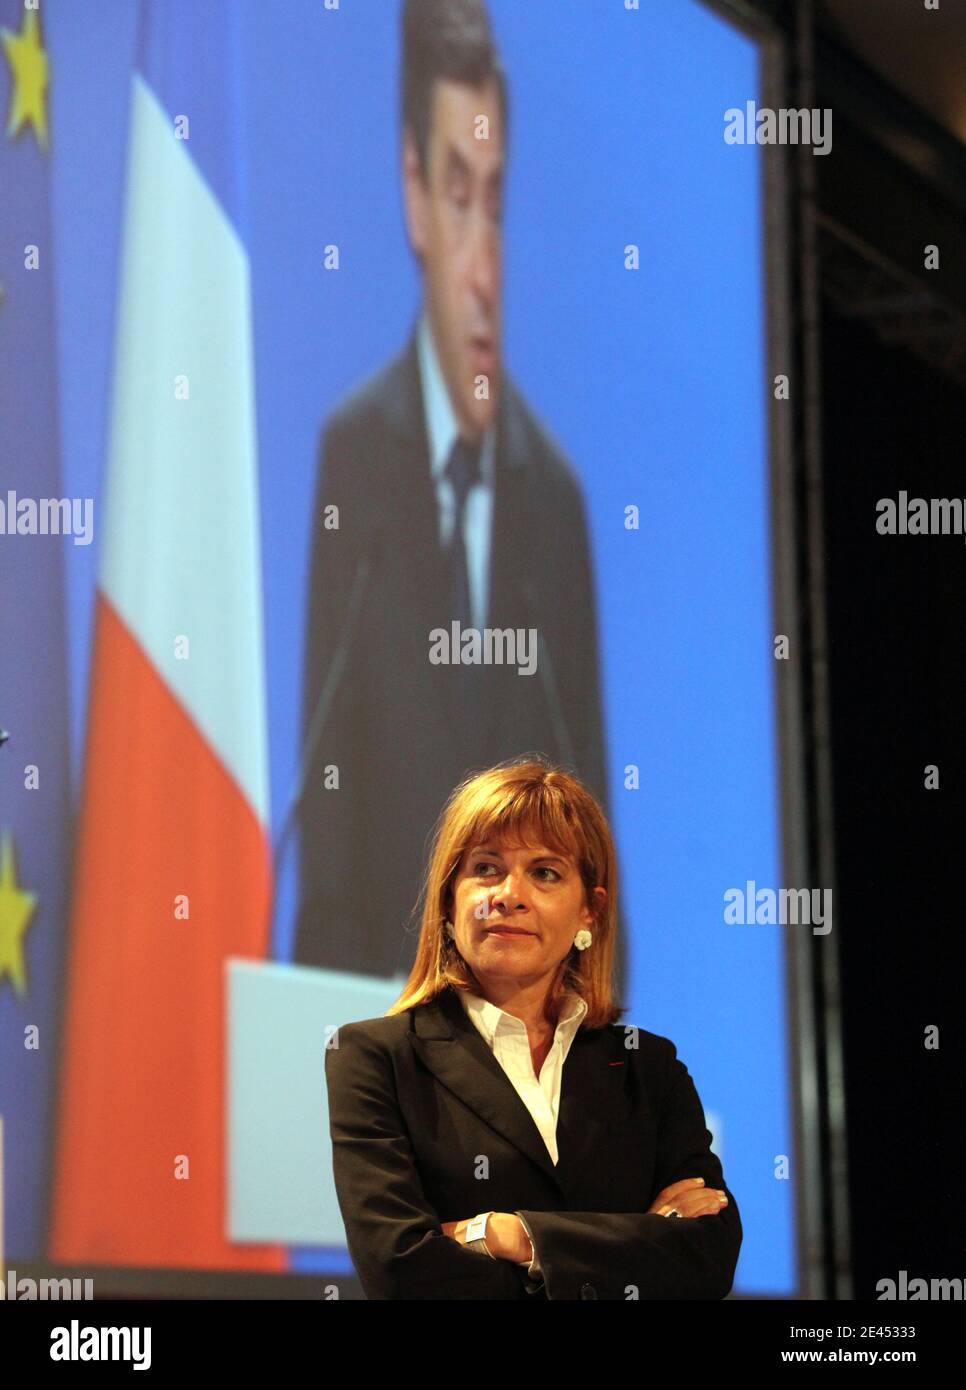 Anne Lauvergeon during the speech of Prime Minister the visit the French Areva power company Tricastin nuclear plant in Bollene, southeastern France, May 18, 2009. Photos by Vincent Dargent/ABACAPRESS.COM Stock Photo